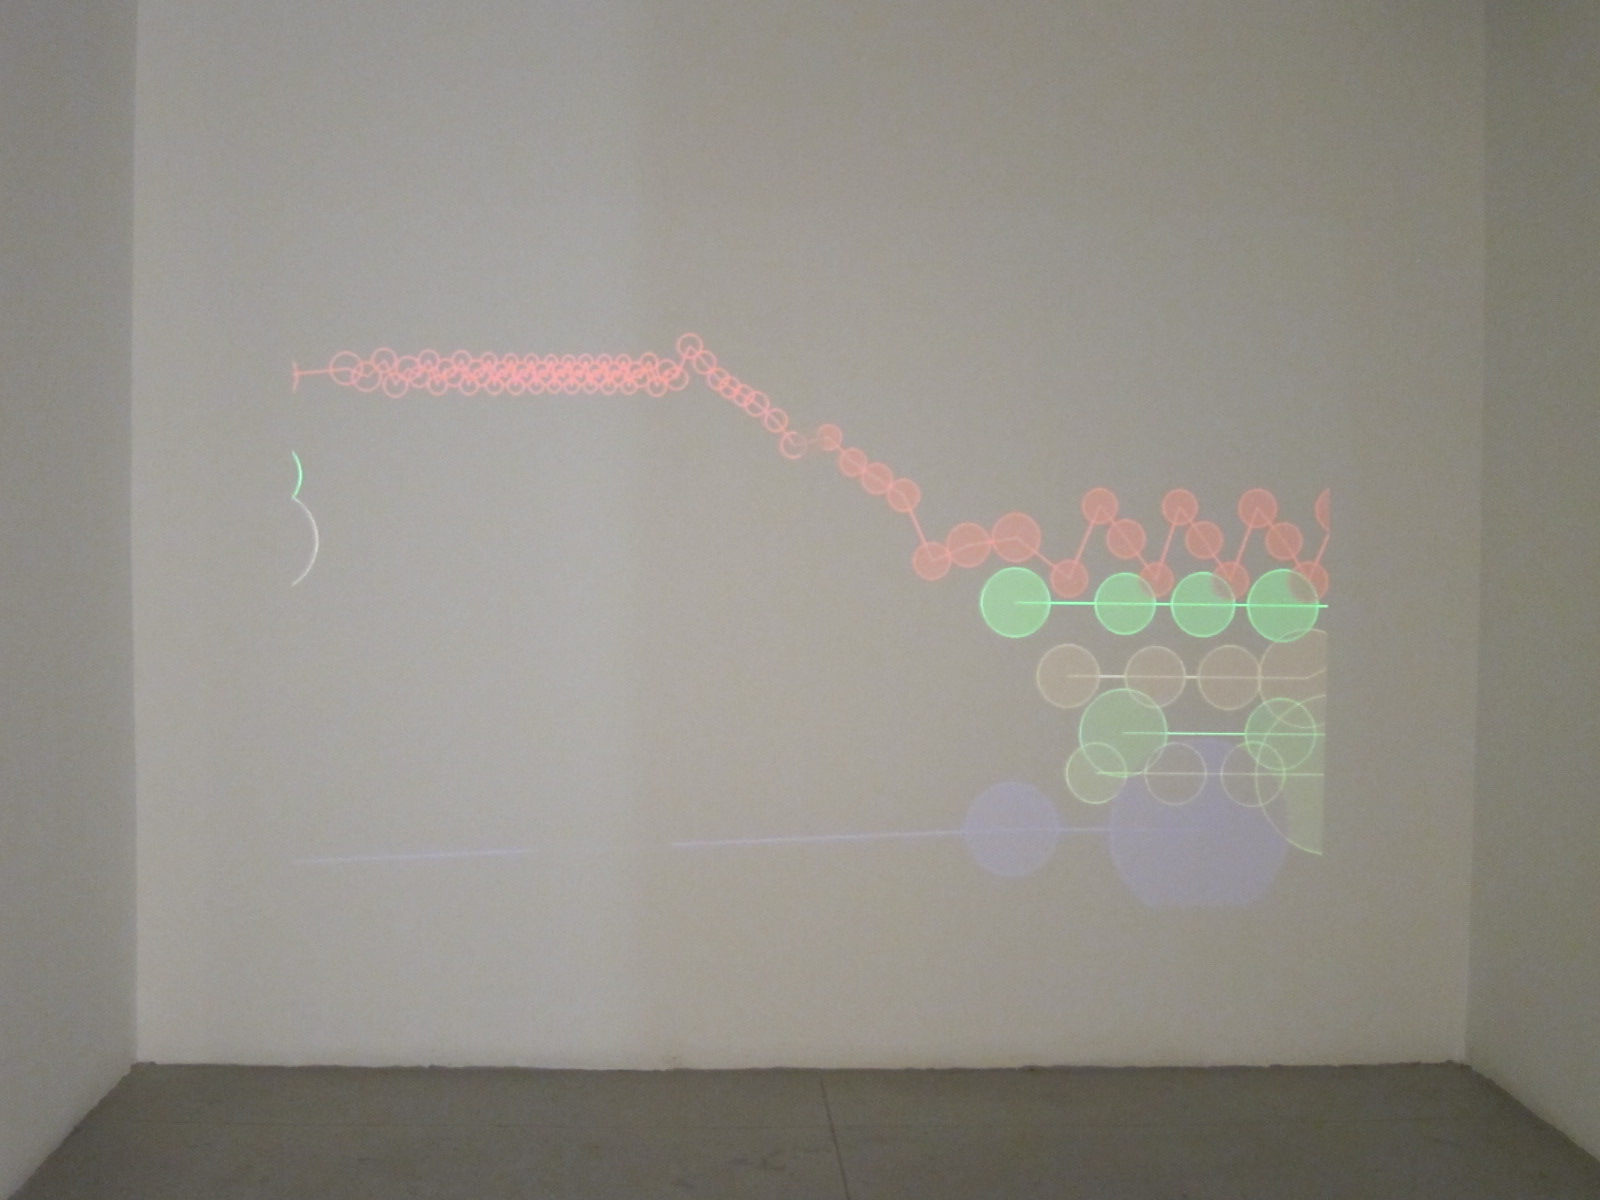   Music Animation Machine (Stephen Malinowski),   Frédéric Chopin’s  “ Nocturne in E-flat Major, Opus 9, No. 2” , 2013. Digital color animation with sound.   